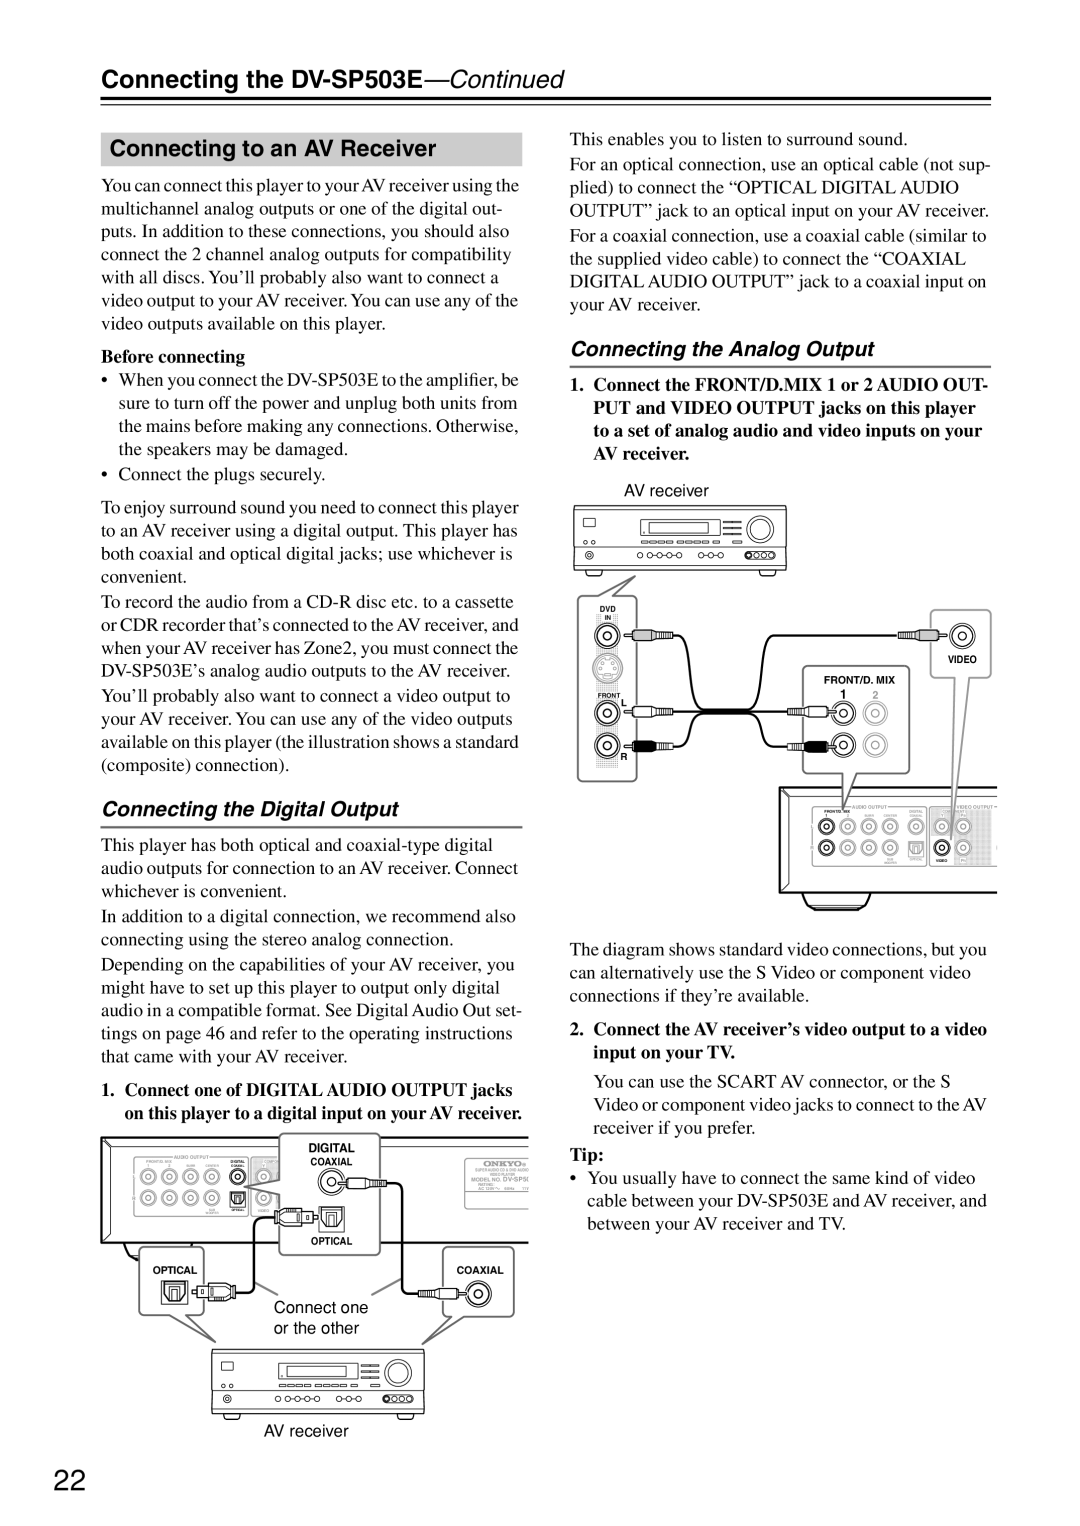 Onkyo instruction manual Connecting to an AV Receiver, Connecting the DV-SP503E-Continued, Connecting the Digital Output 